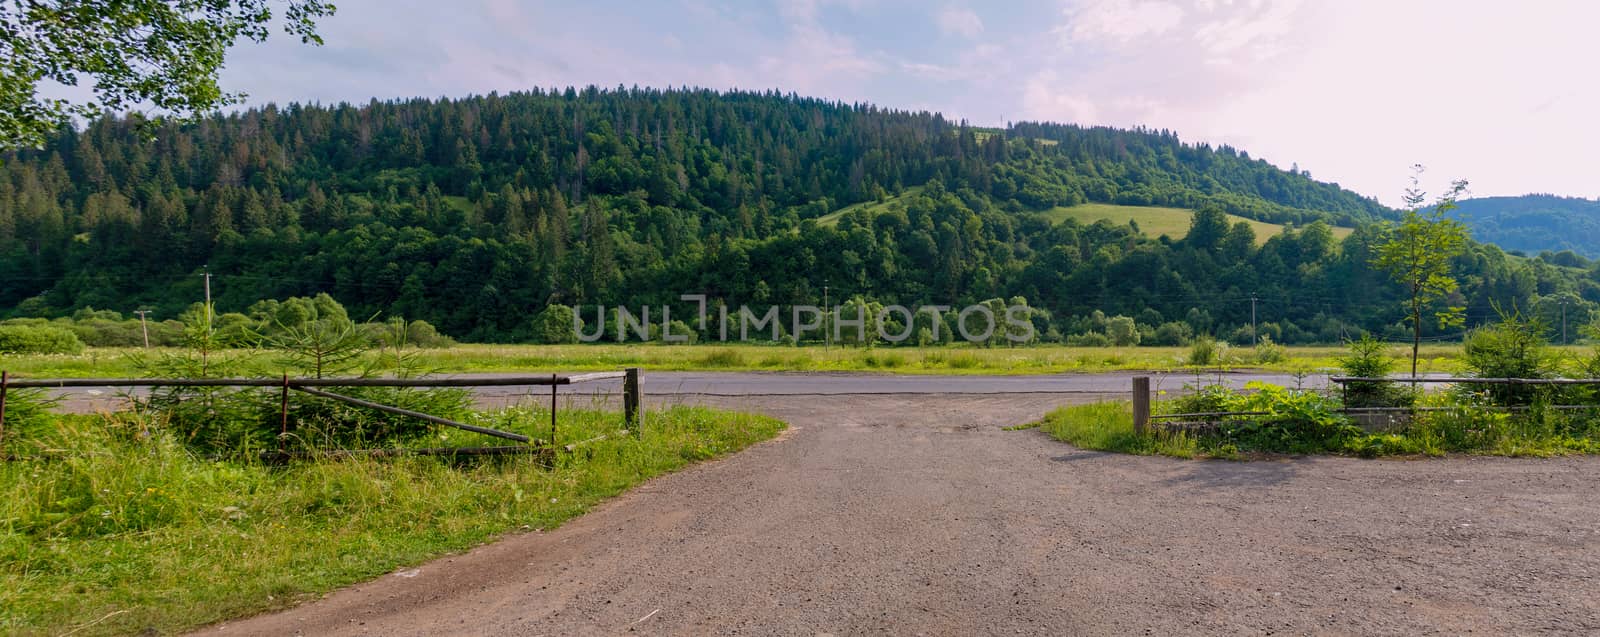 Extensive country road in the background of a mountain with green trees by Adamchuk